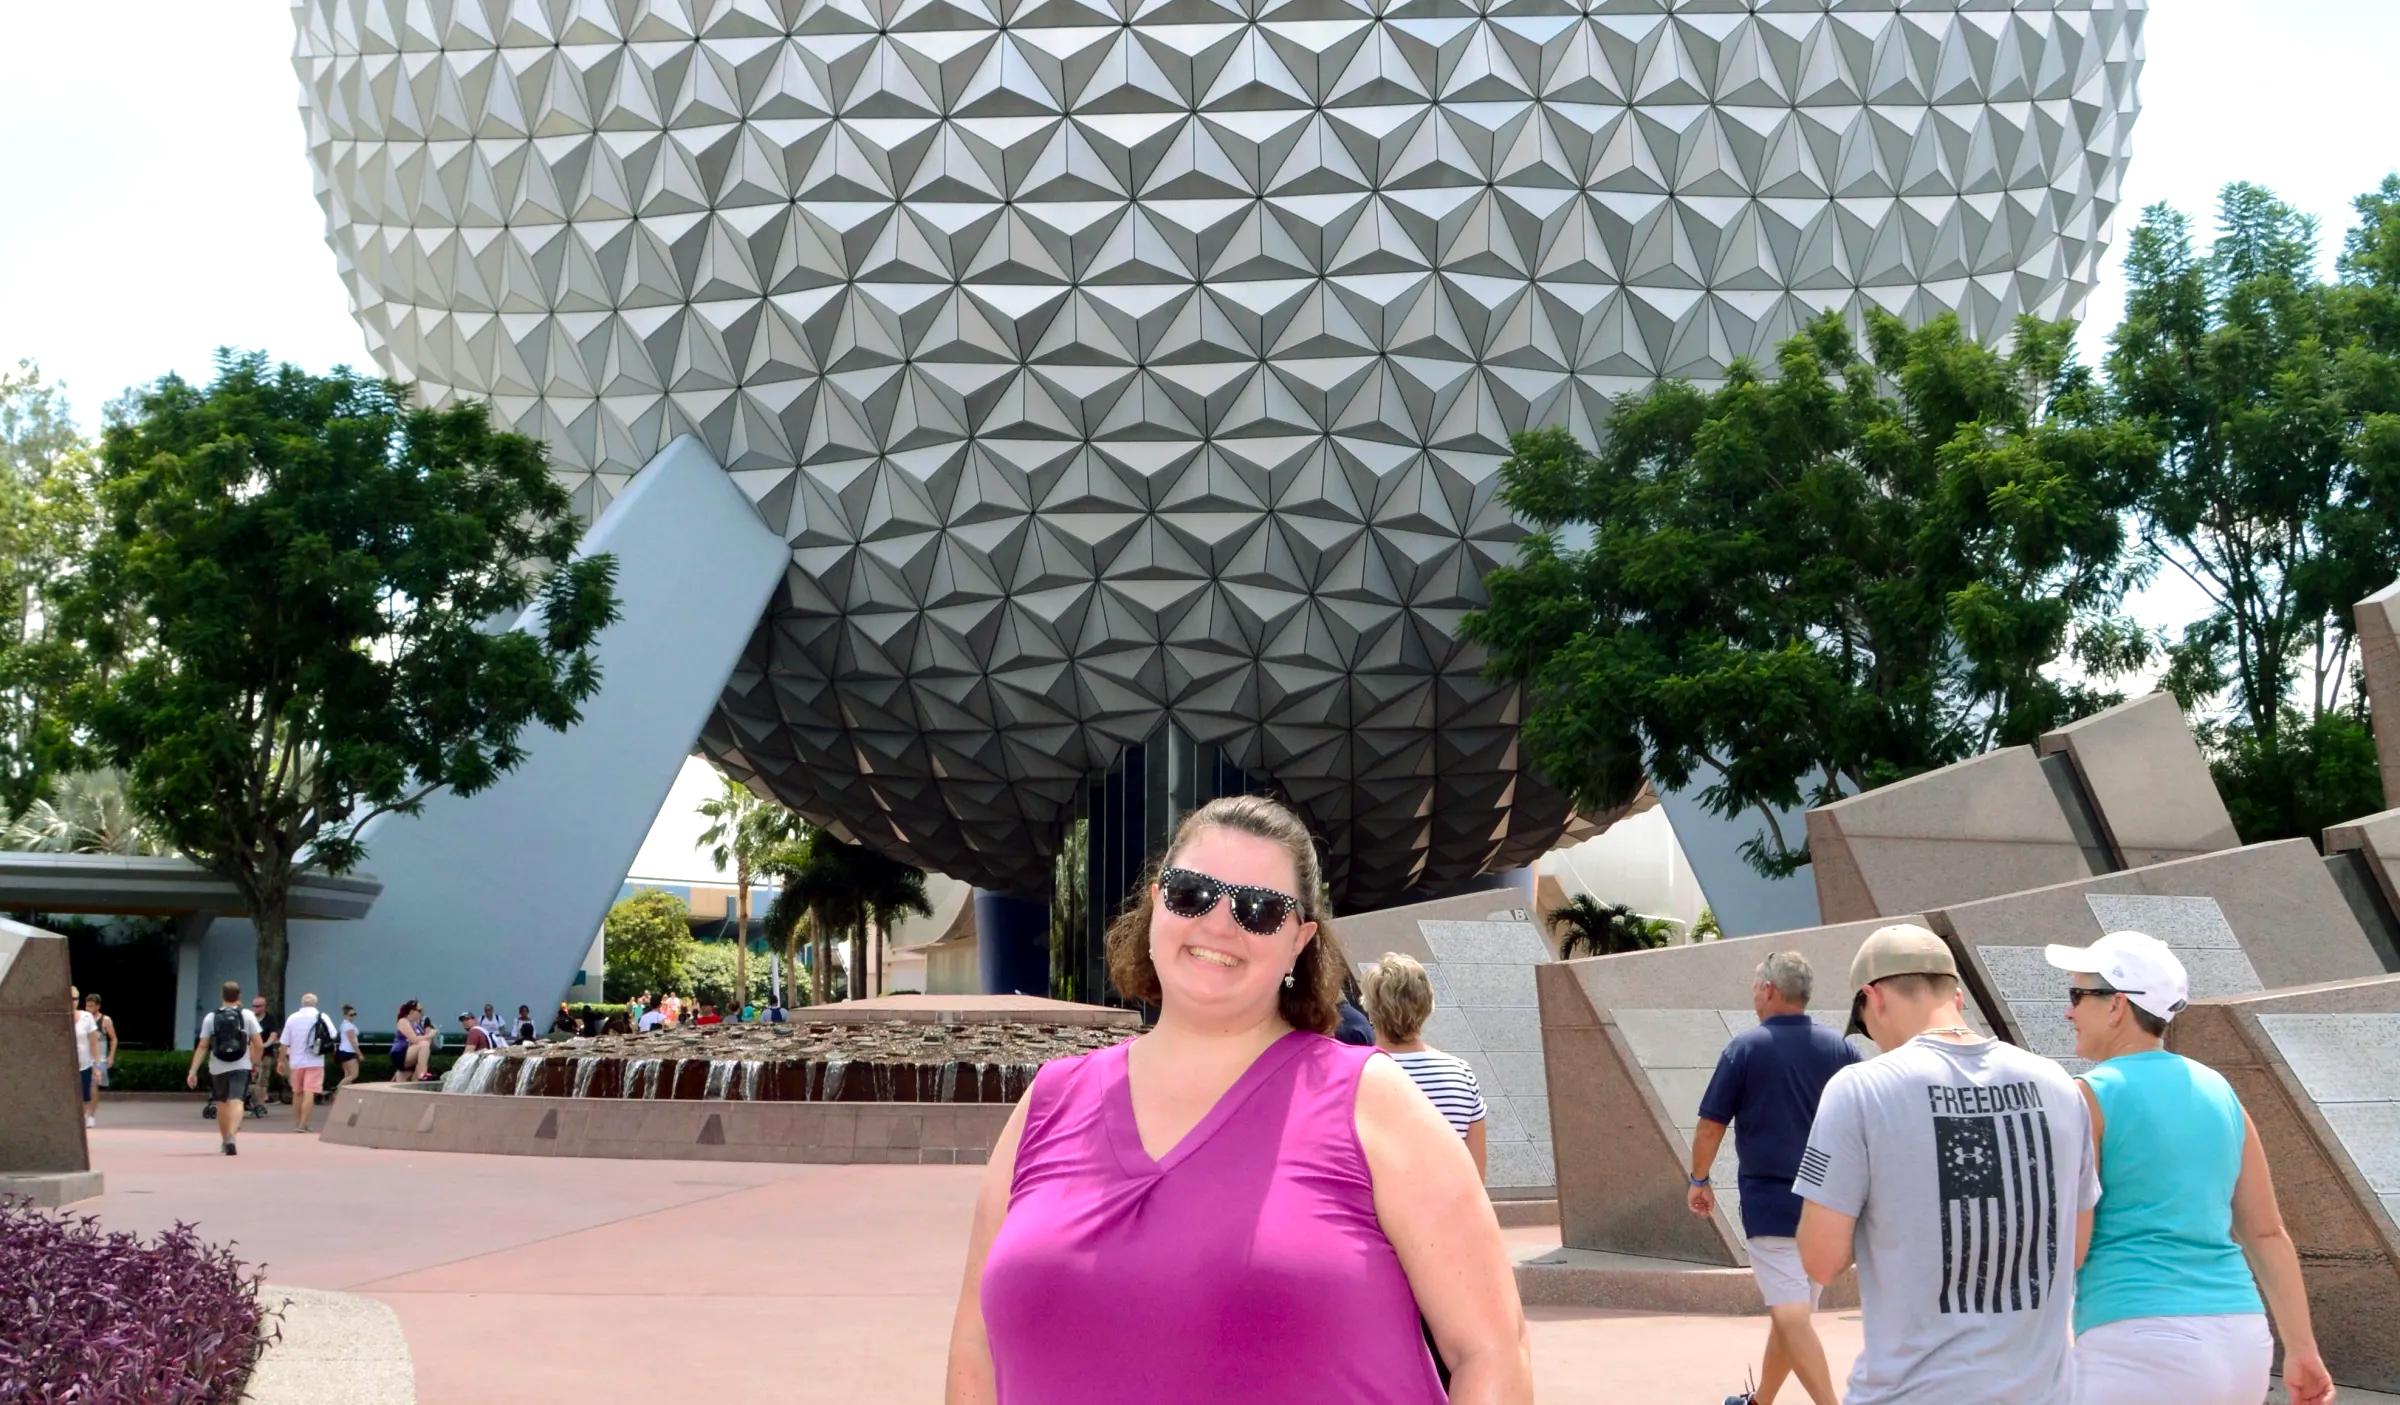 EPCOT Food and Wine Festival: Why Go Solo